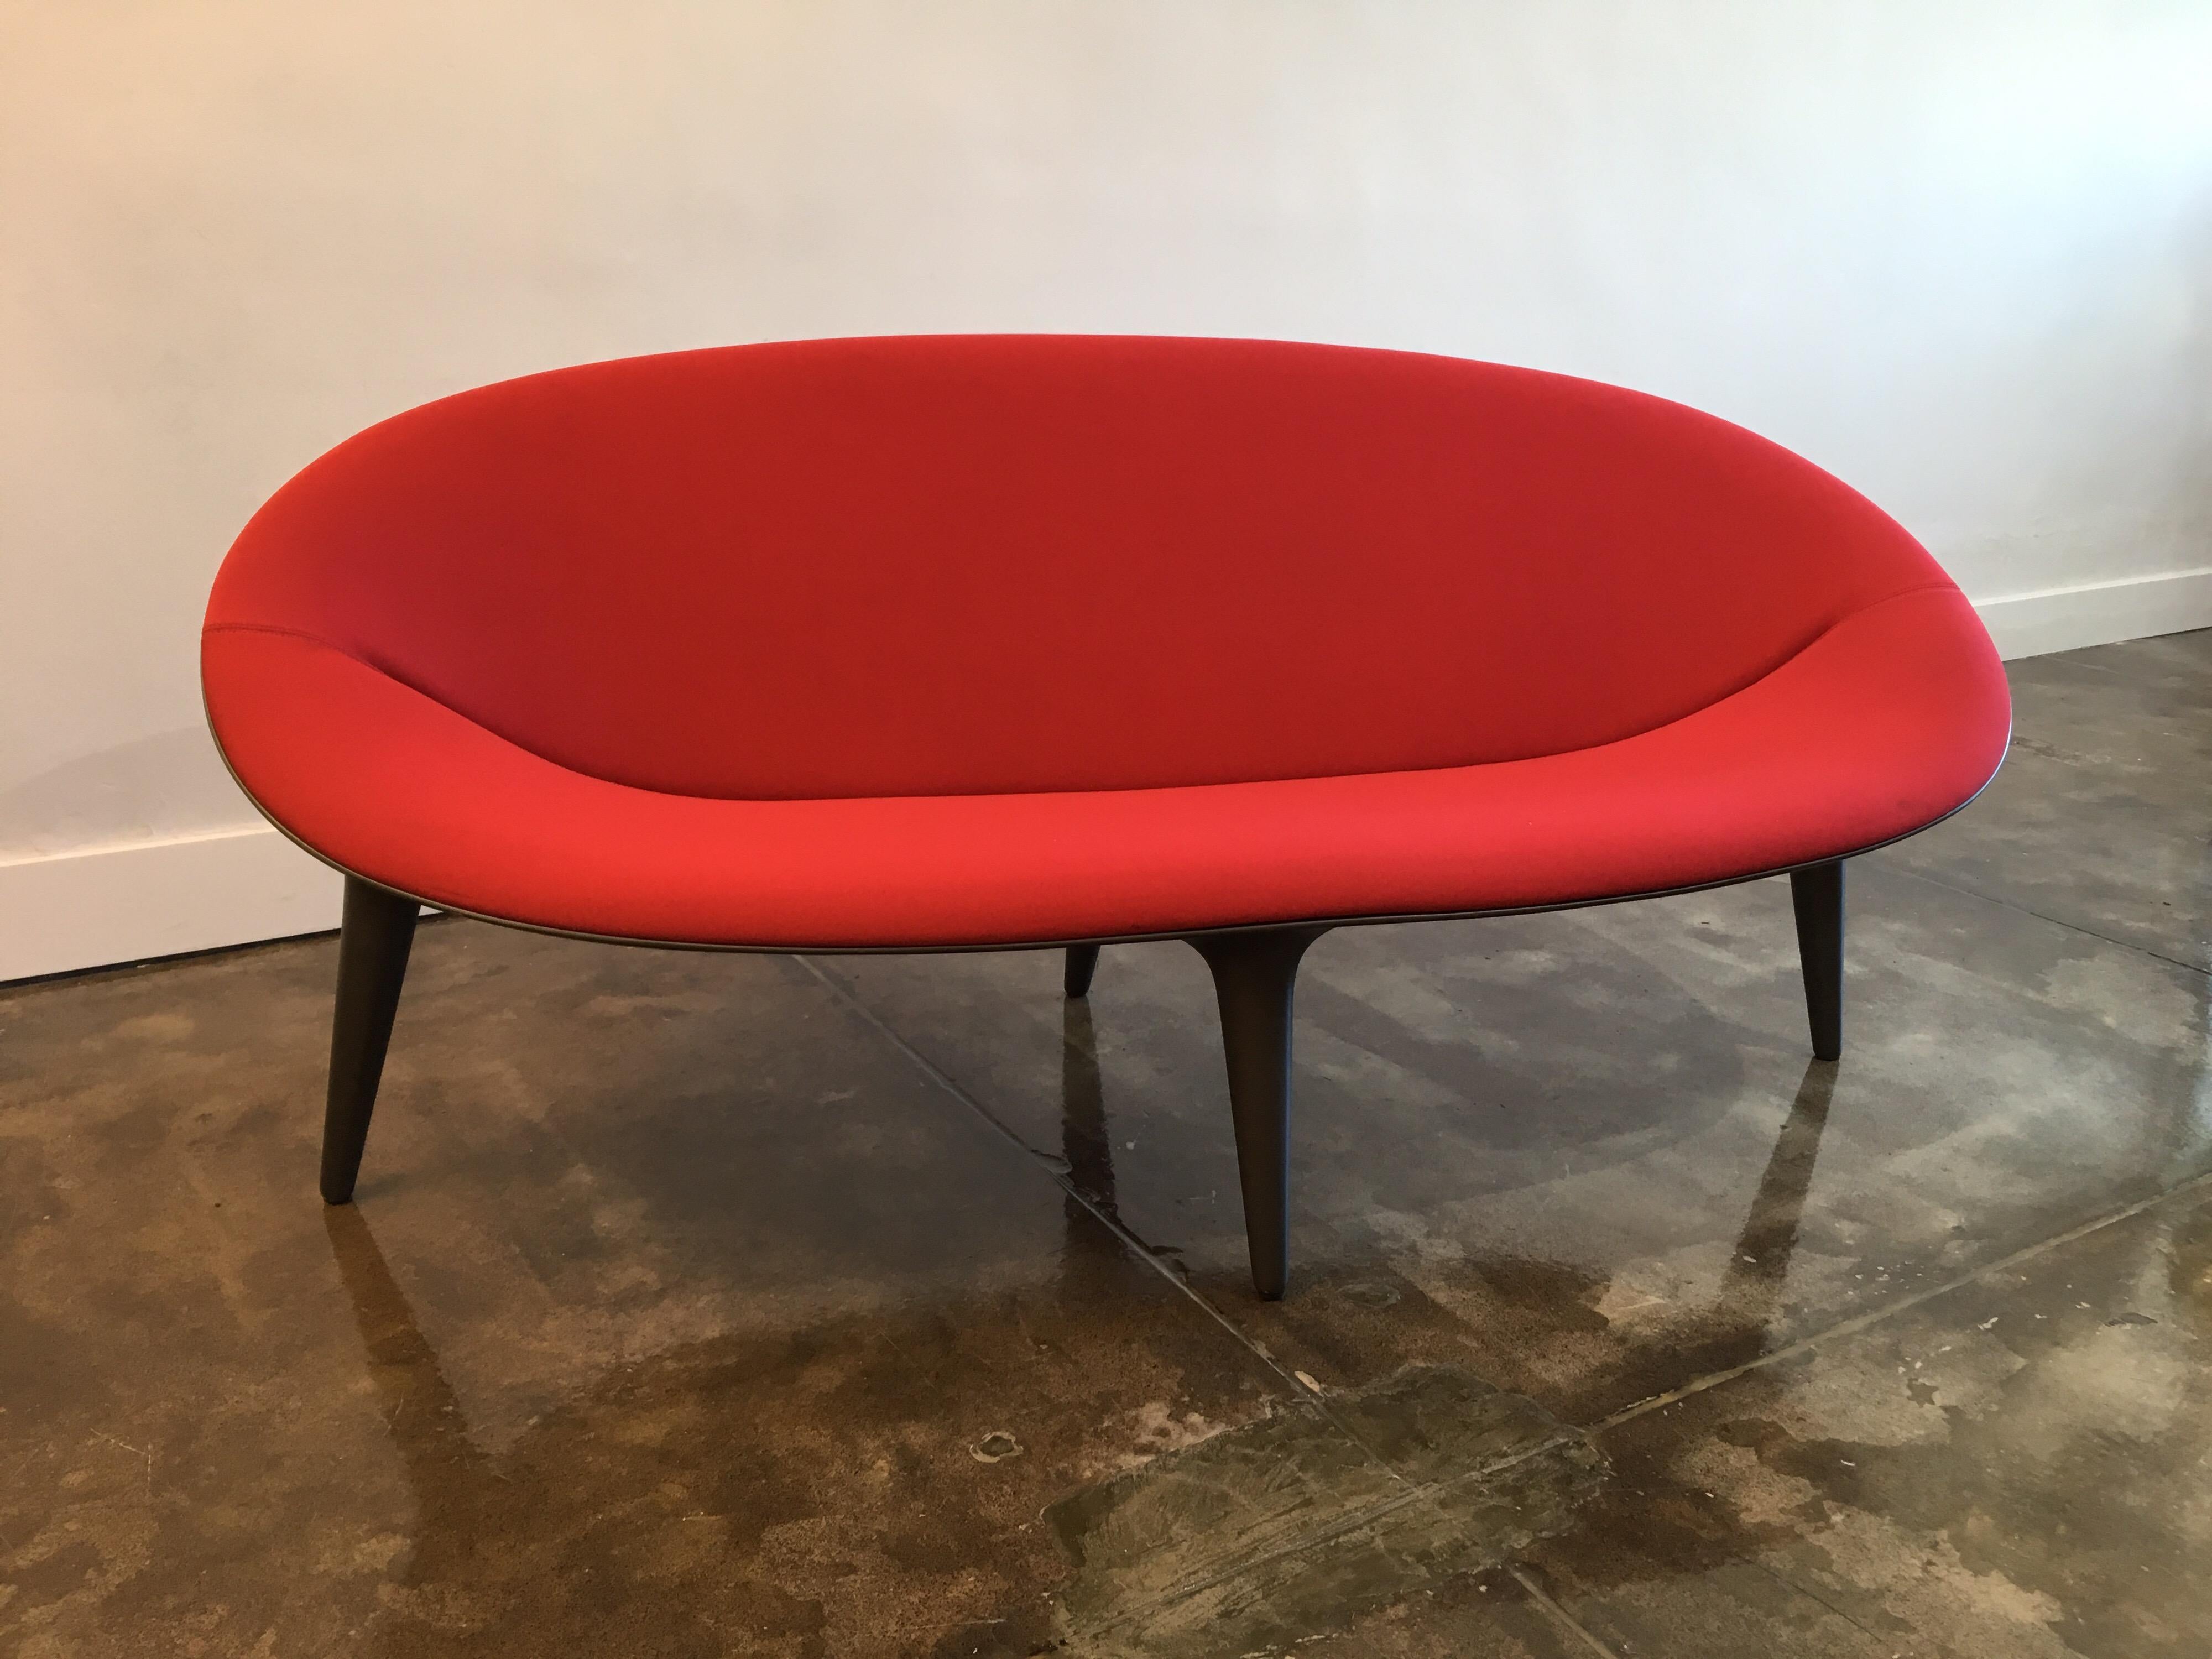 Phillipe Starck 'Strange Thing' Sofa for Cassina In Good Condition For Sale In Melbourne, AU